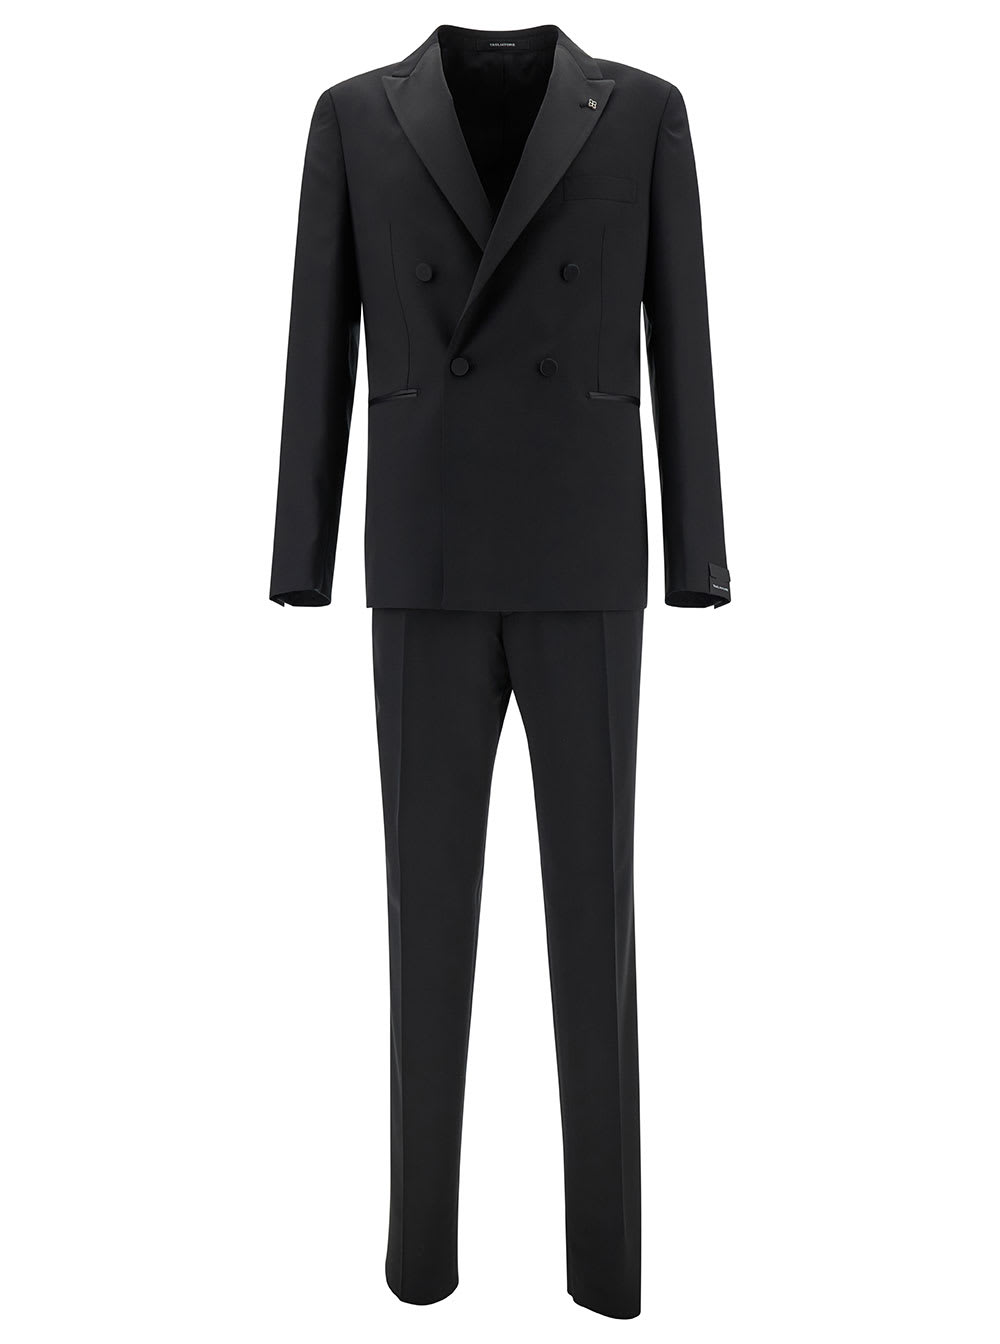 Black Double-breasted Tuxedo With Peak Revers In Wool Man